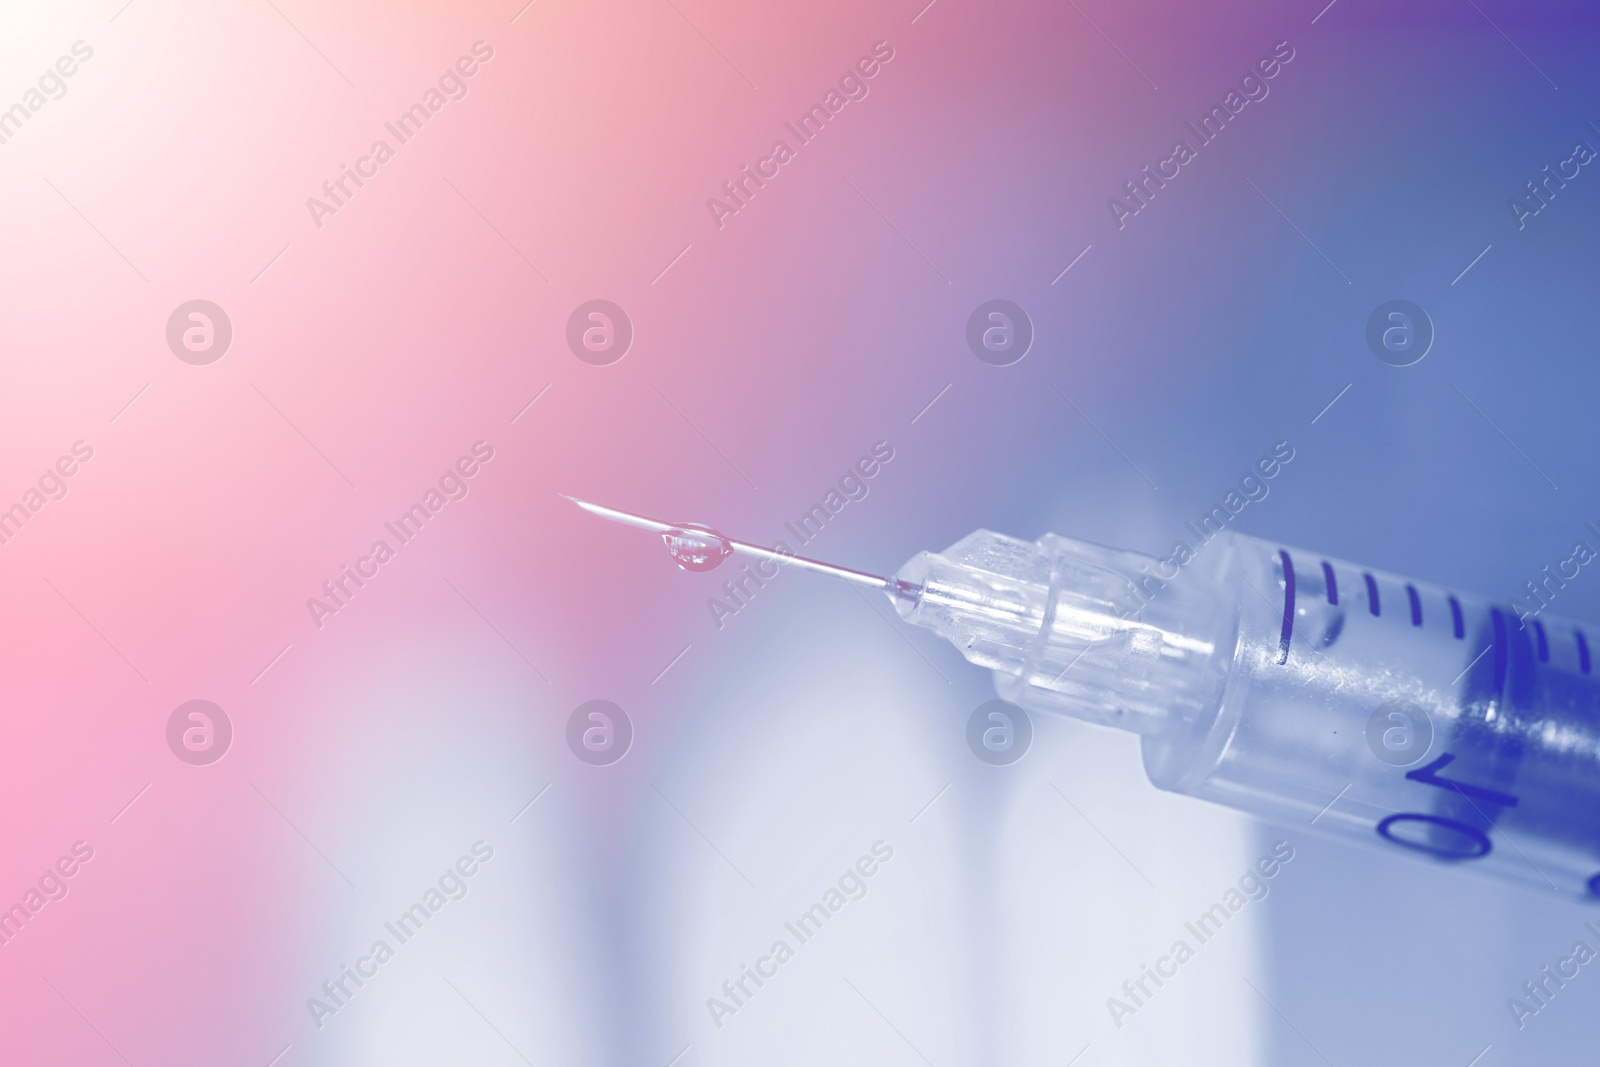 Image of Syringe with medicine against blurred background, closeup. Color toned